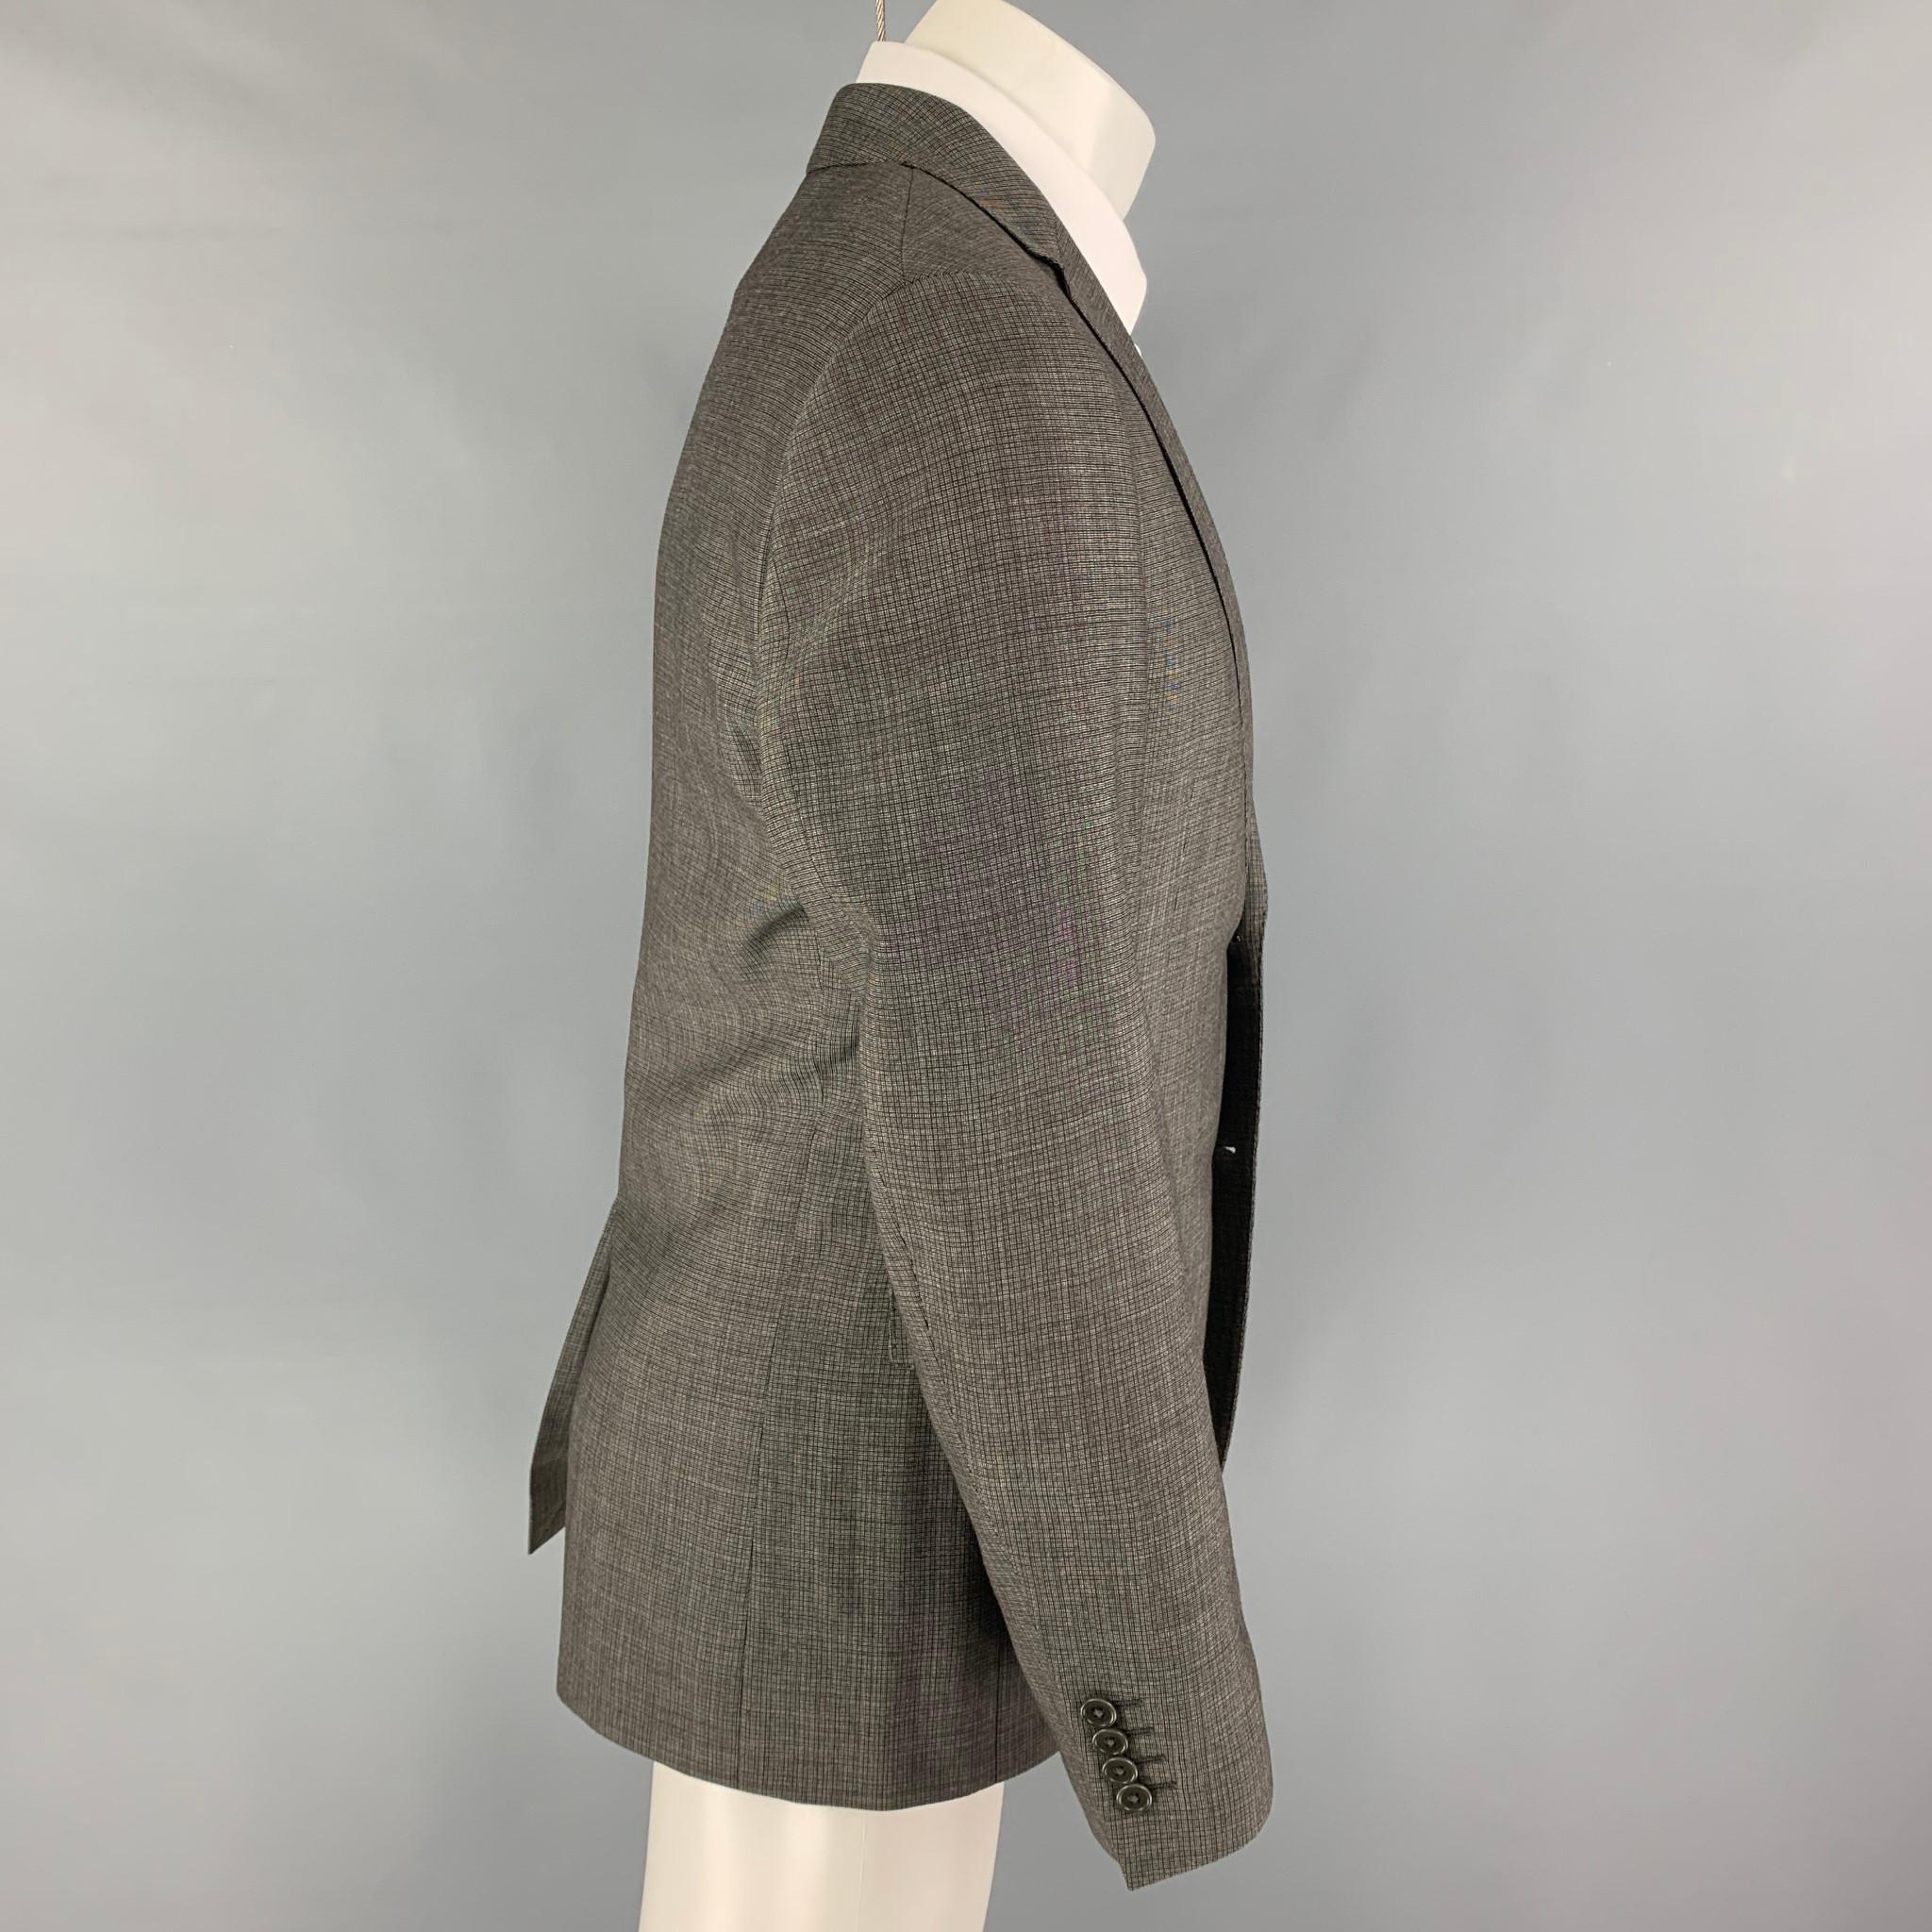 JOHN VARVATOS sport coat comes in a grey & black wool with a full liner featuring a notch lapel, flap pockets, single back vent, and a double button closure.

Excellent Pre-Owned Condition.
Marked: Size tag removed

Measurements:

Shoulder: 17.5